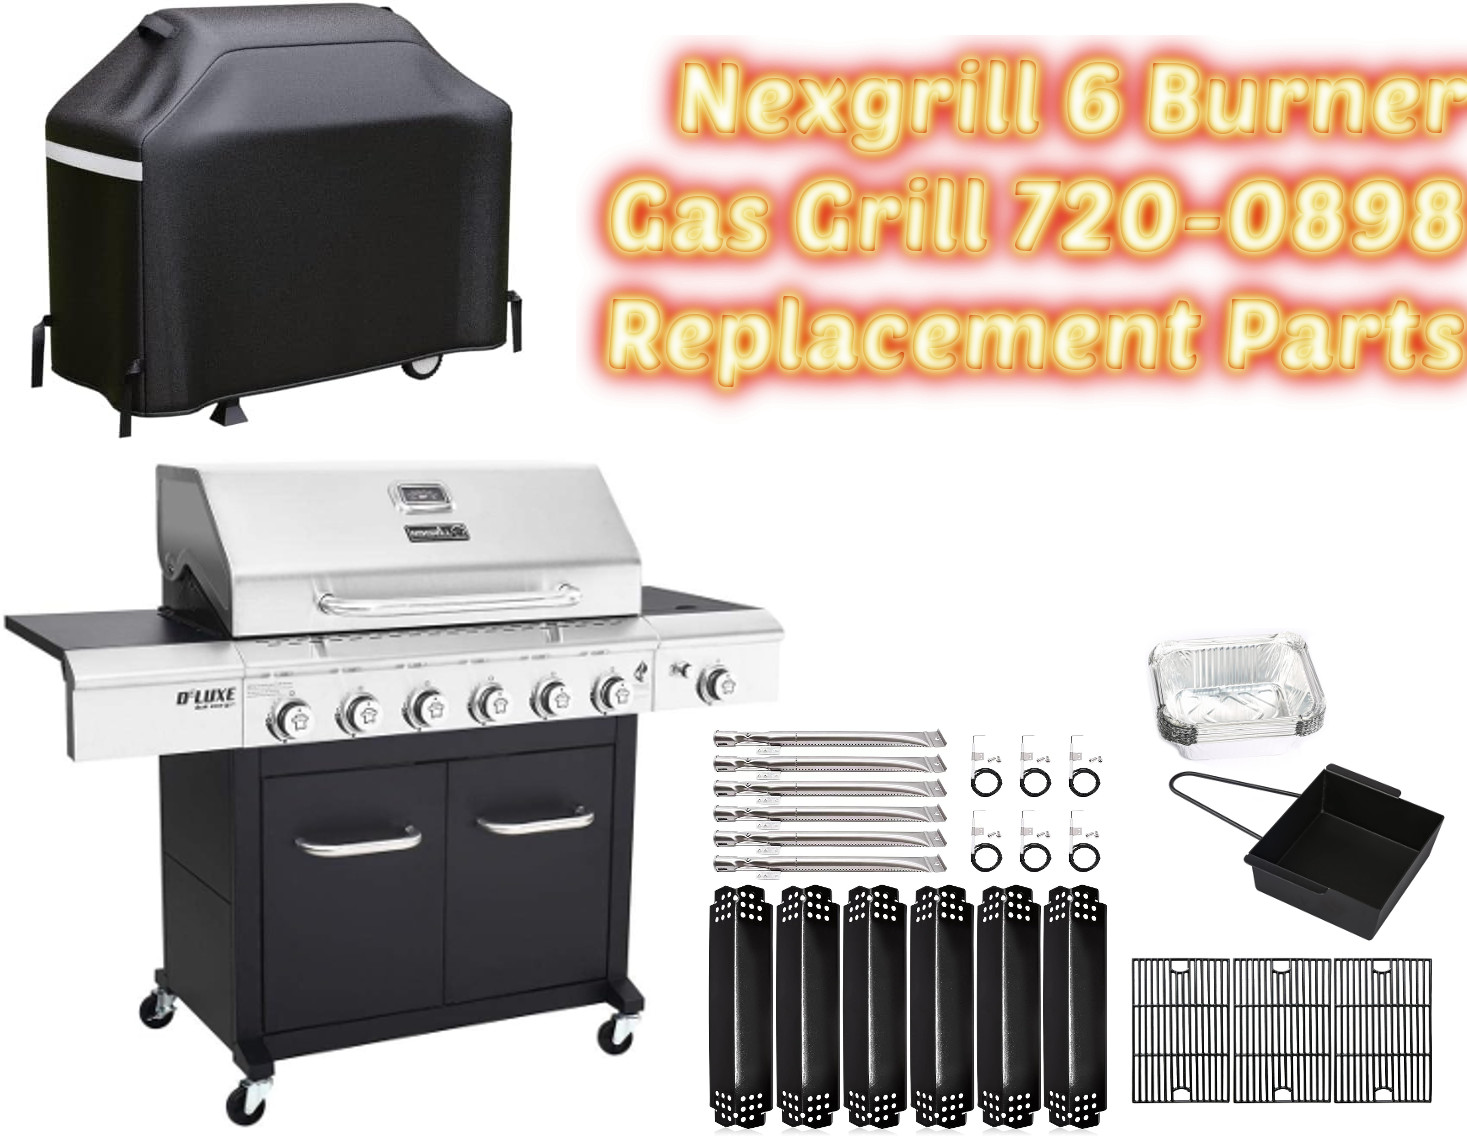 Nexgrill 720-0898 replacement parts